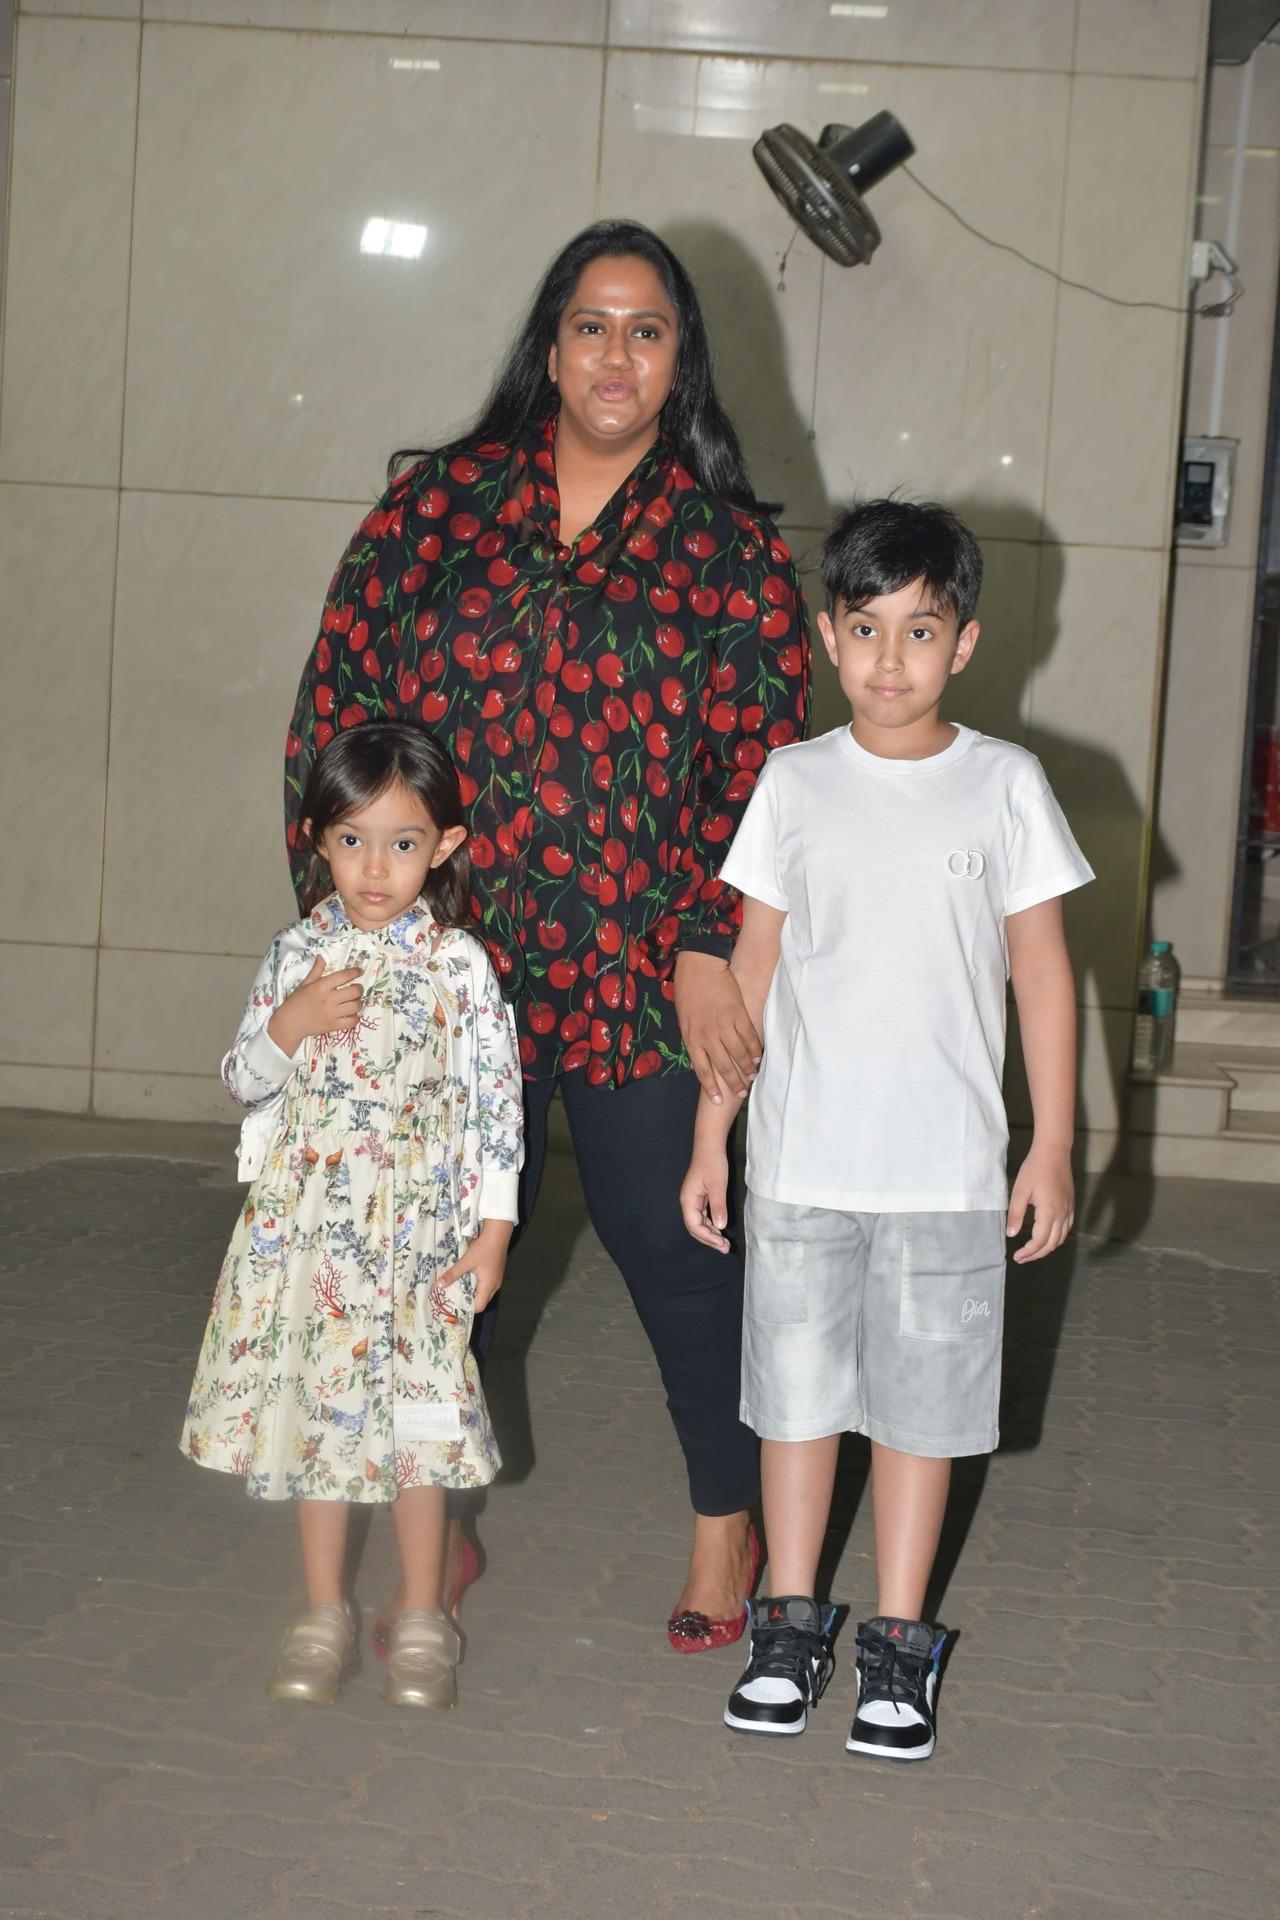 Arpita Khan Sharma arrived at the party with her two kids